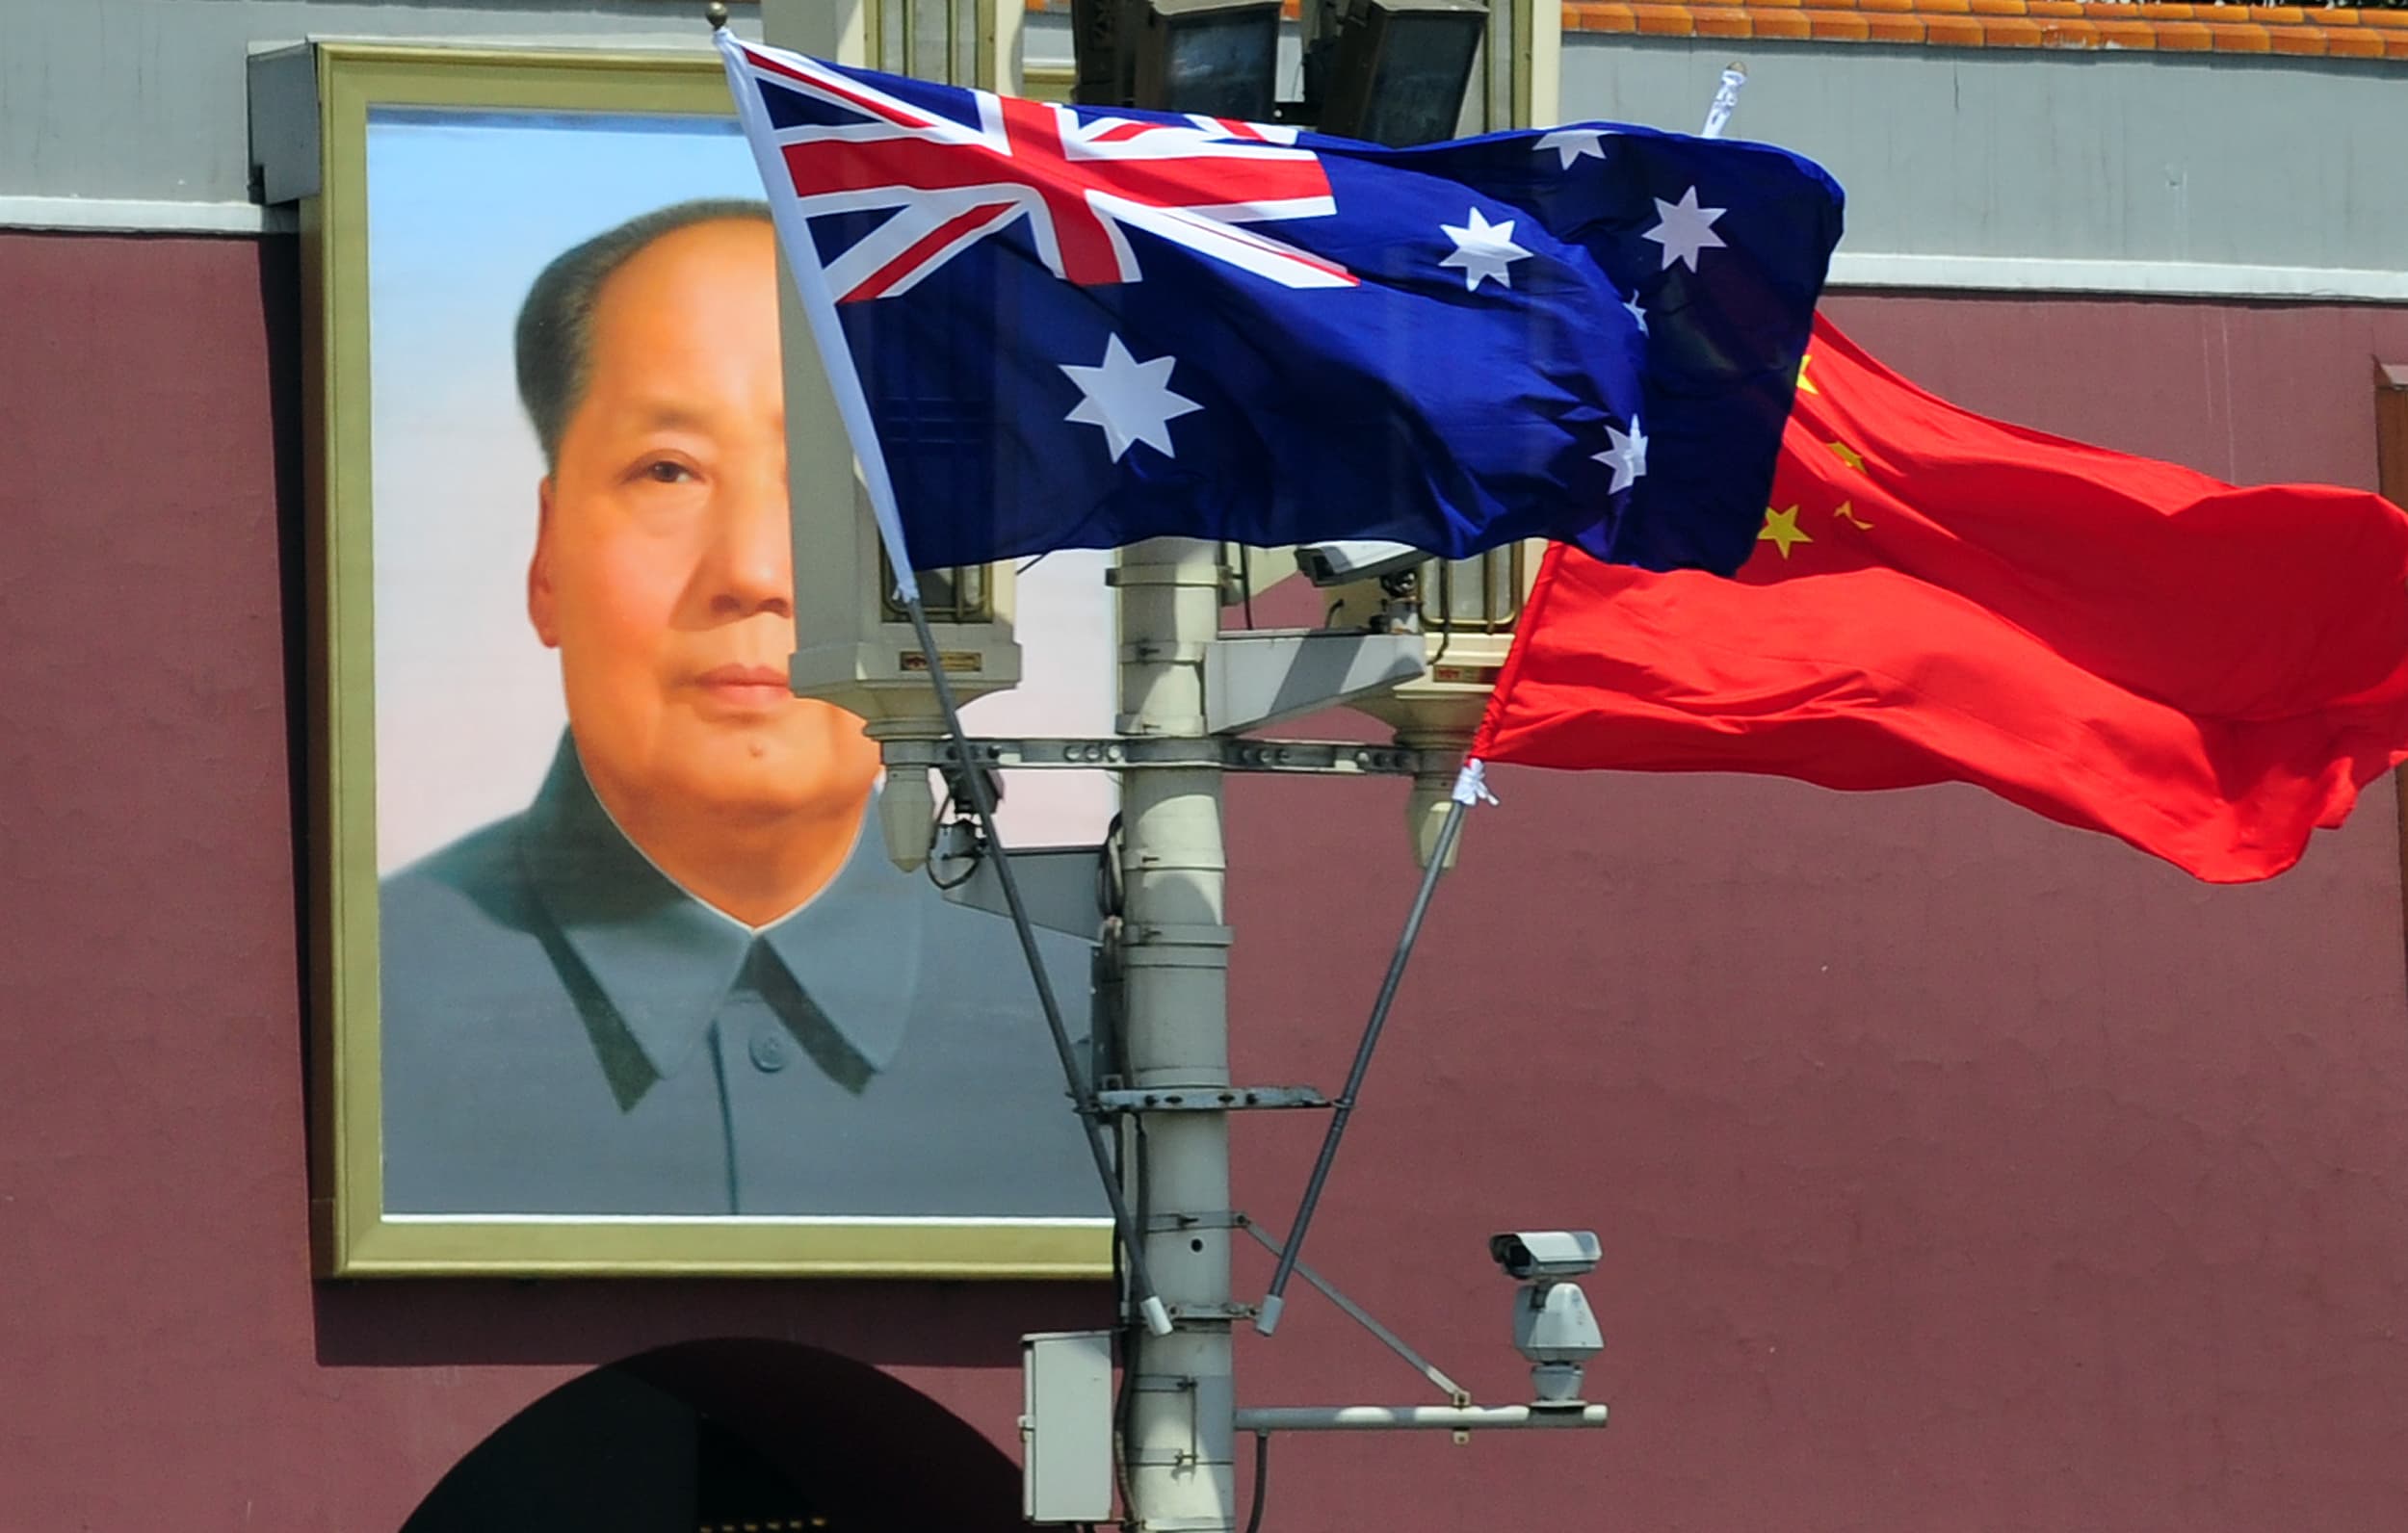 Australia says it is ‘seriously concerned’ about journalist’s yearlong detention in China